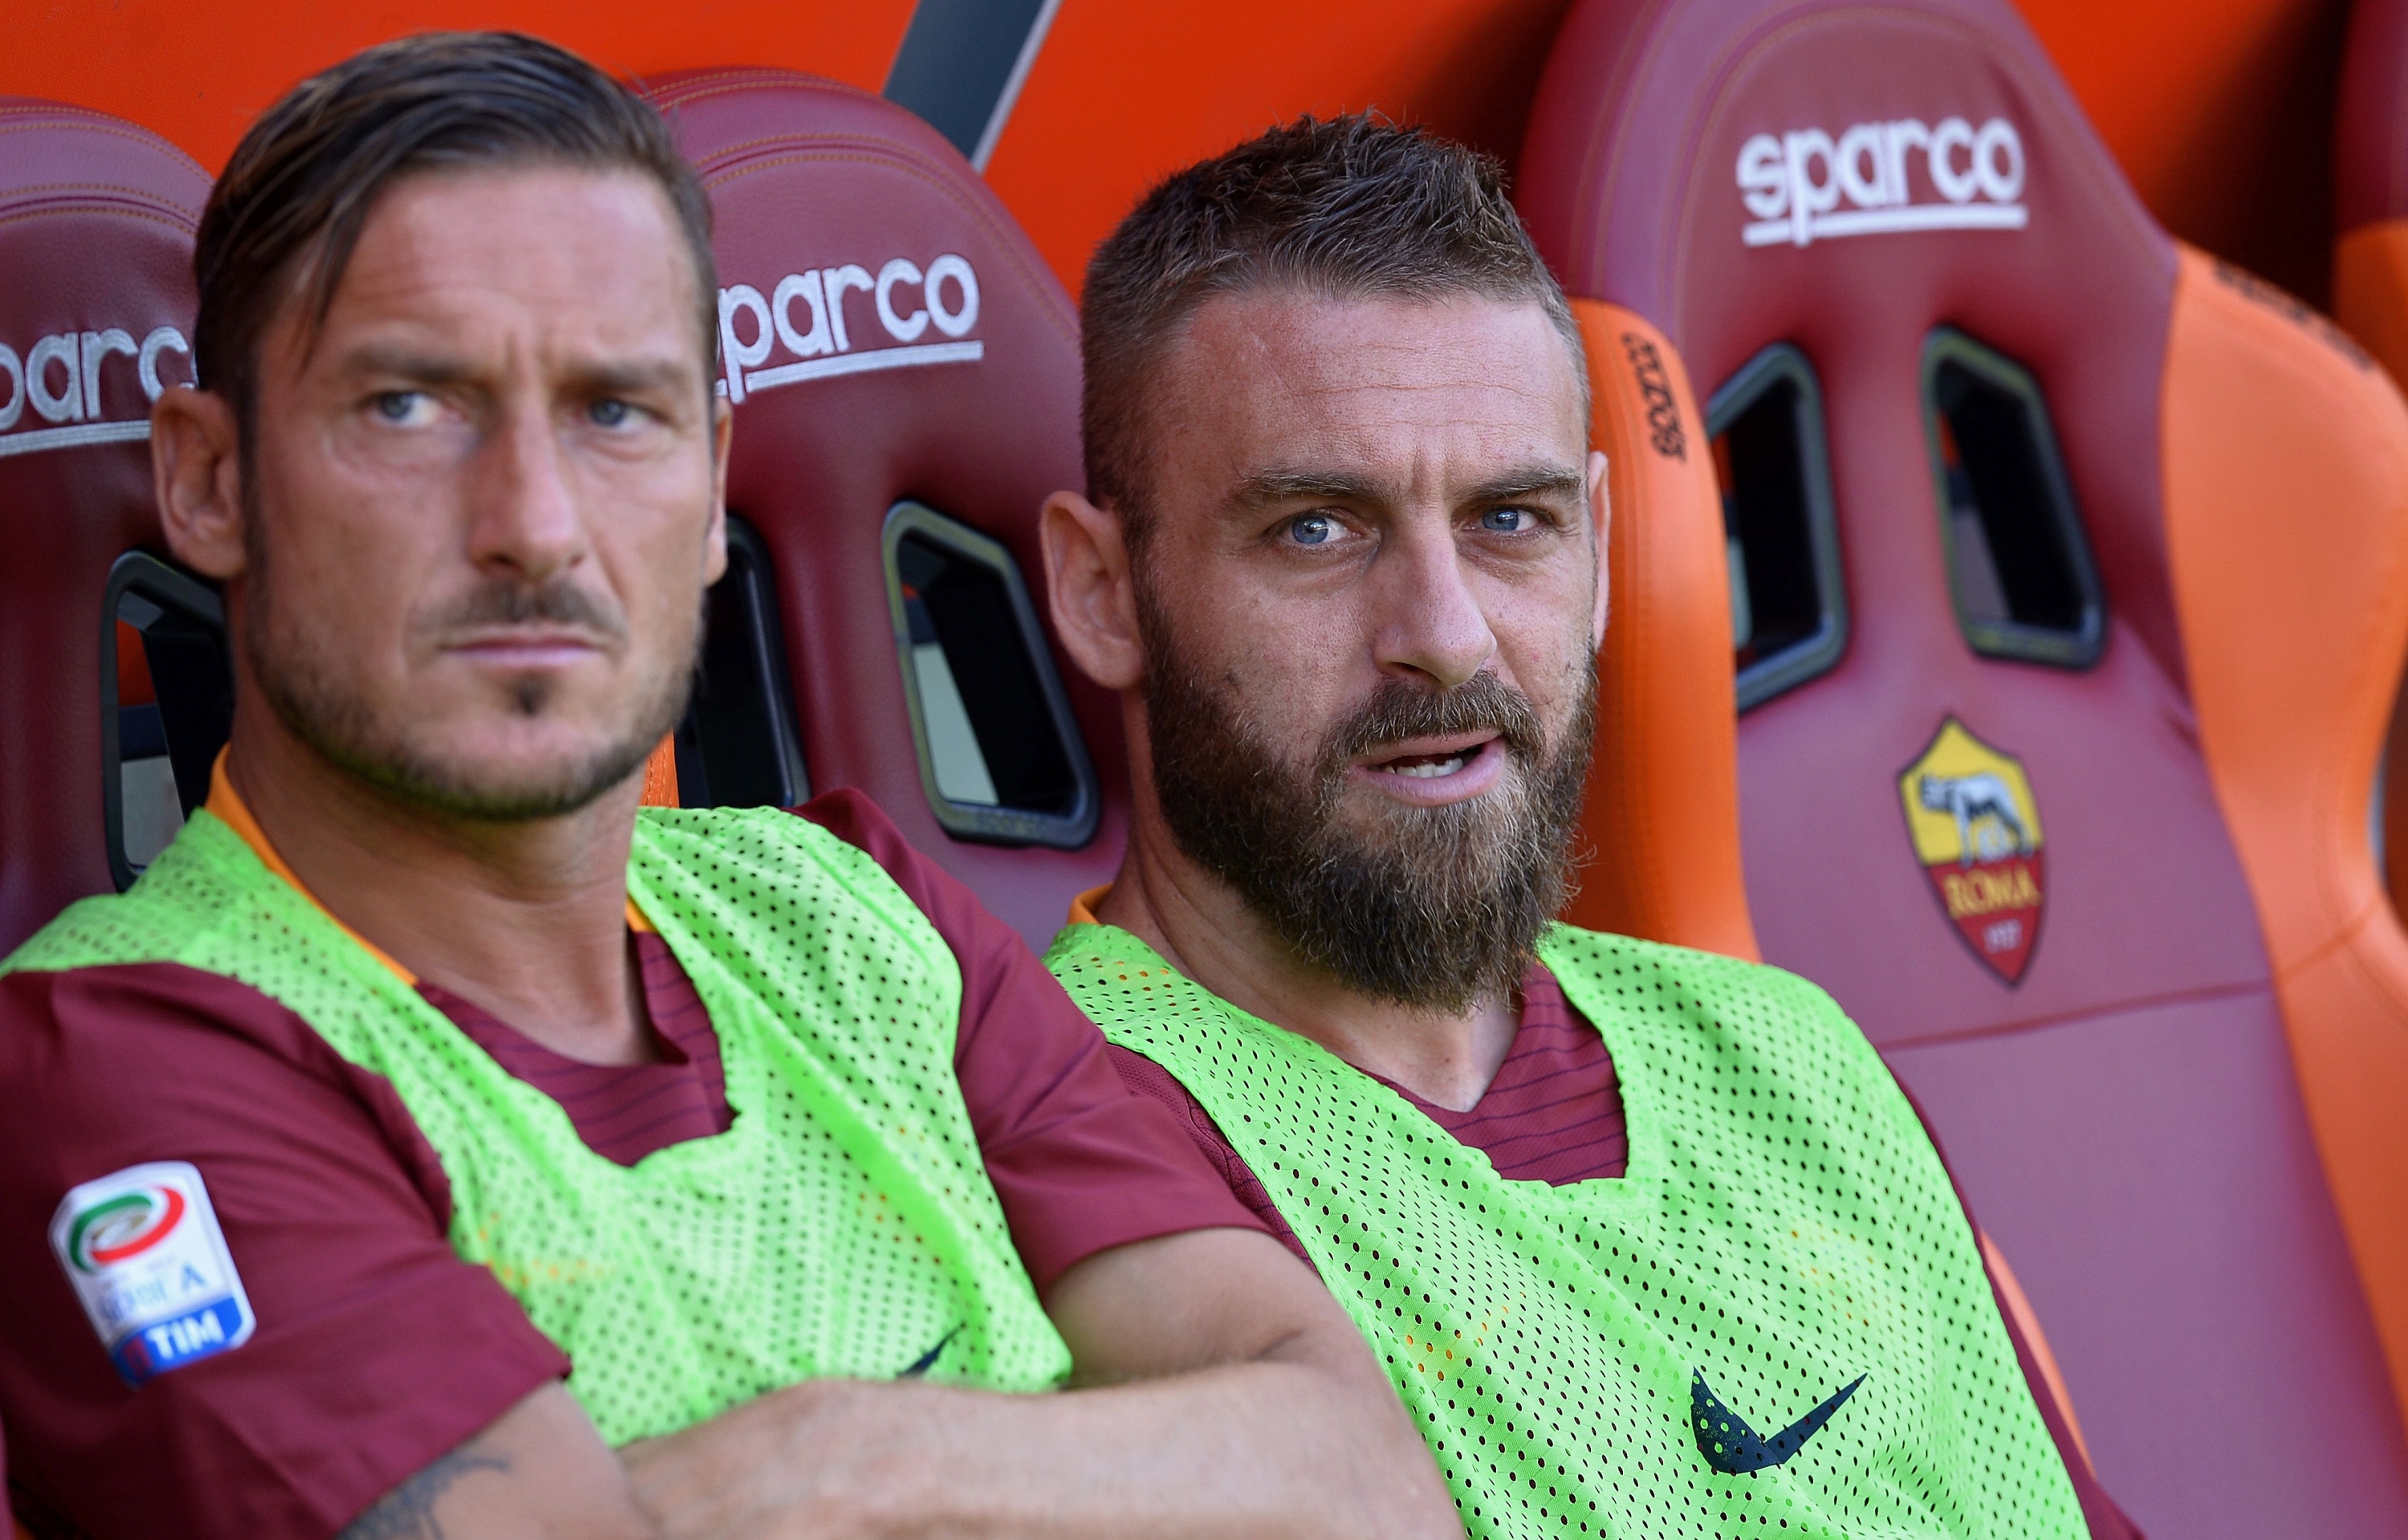 Roma's midfielder Daniele De Rossi (R) and forward Francesco Totti look on from the bench during the Italian Serie A football match between Roma and Udinese at the Olympic Stadium in Rome on August 20, 2016.   / AFP PHOTO / FILIPPO MONTEFORTE